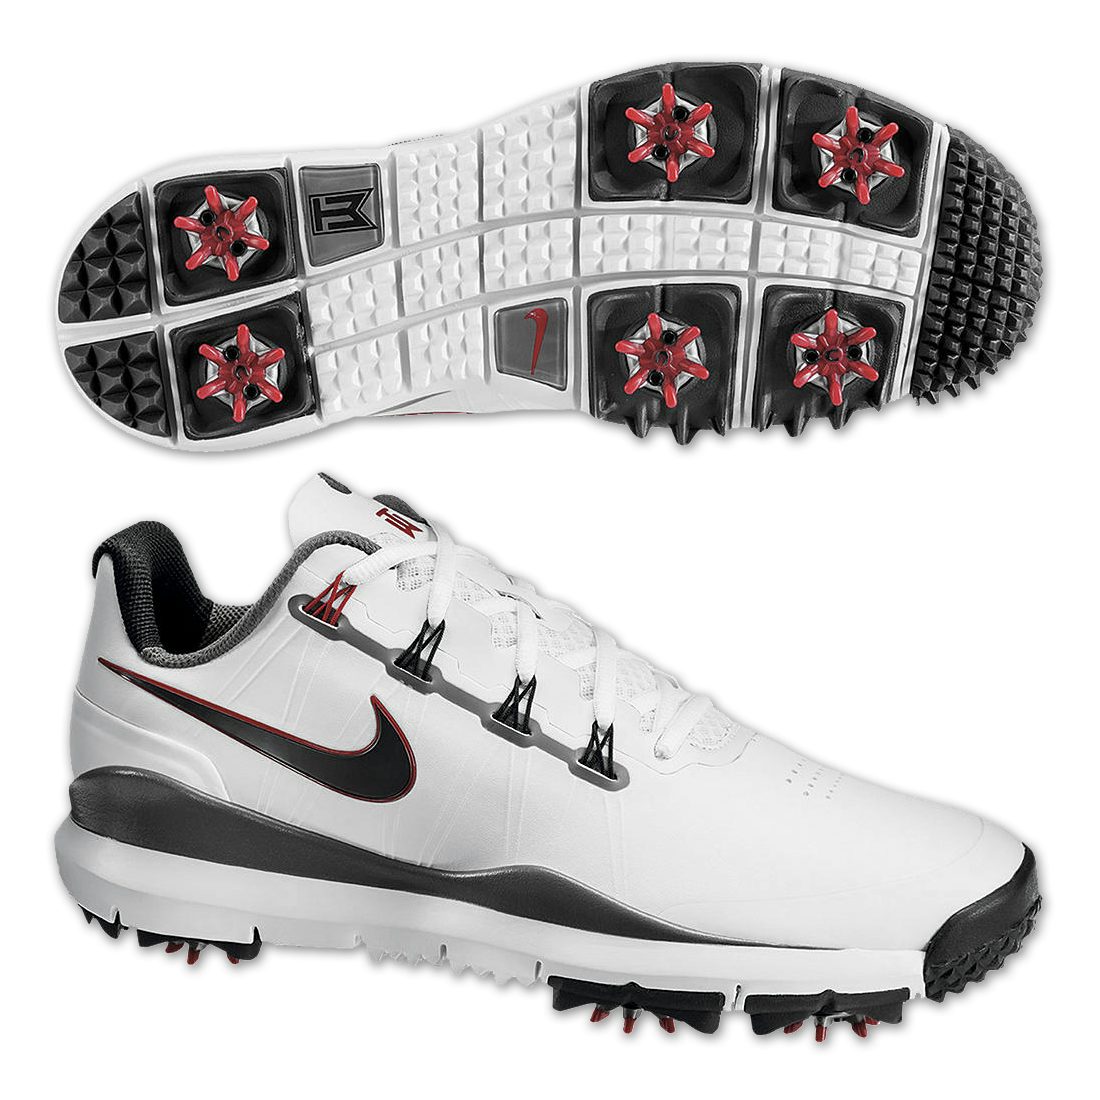 tiger woods golf shoes 2014